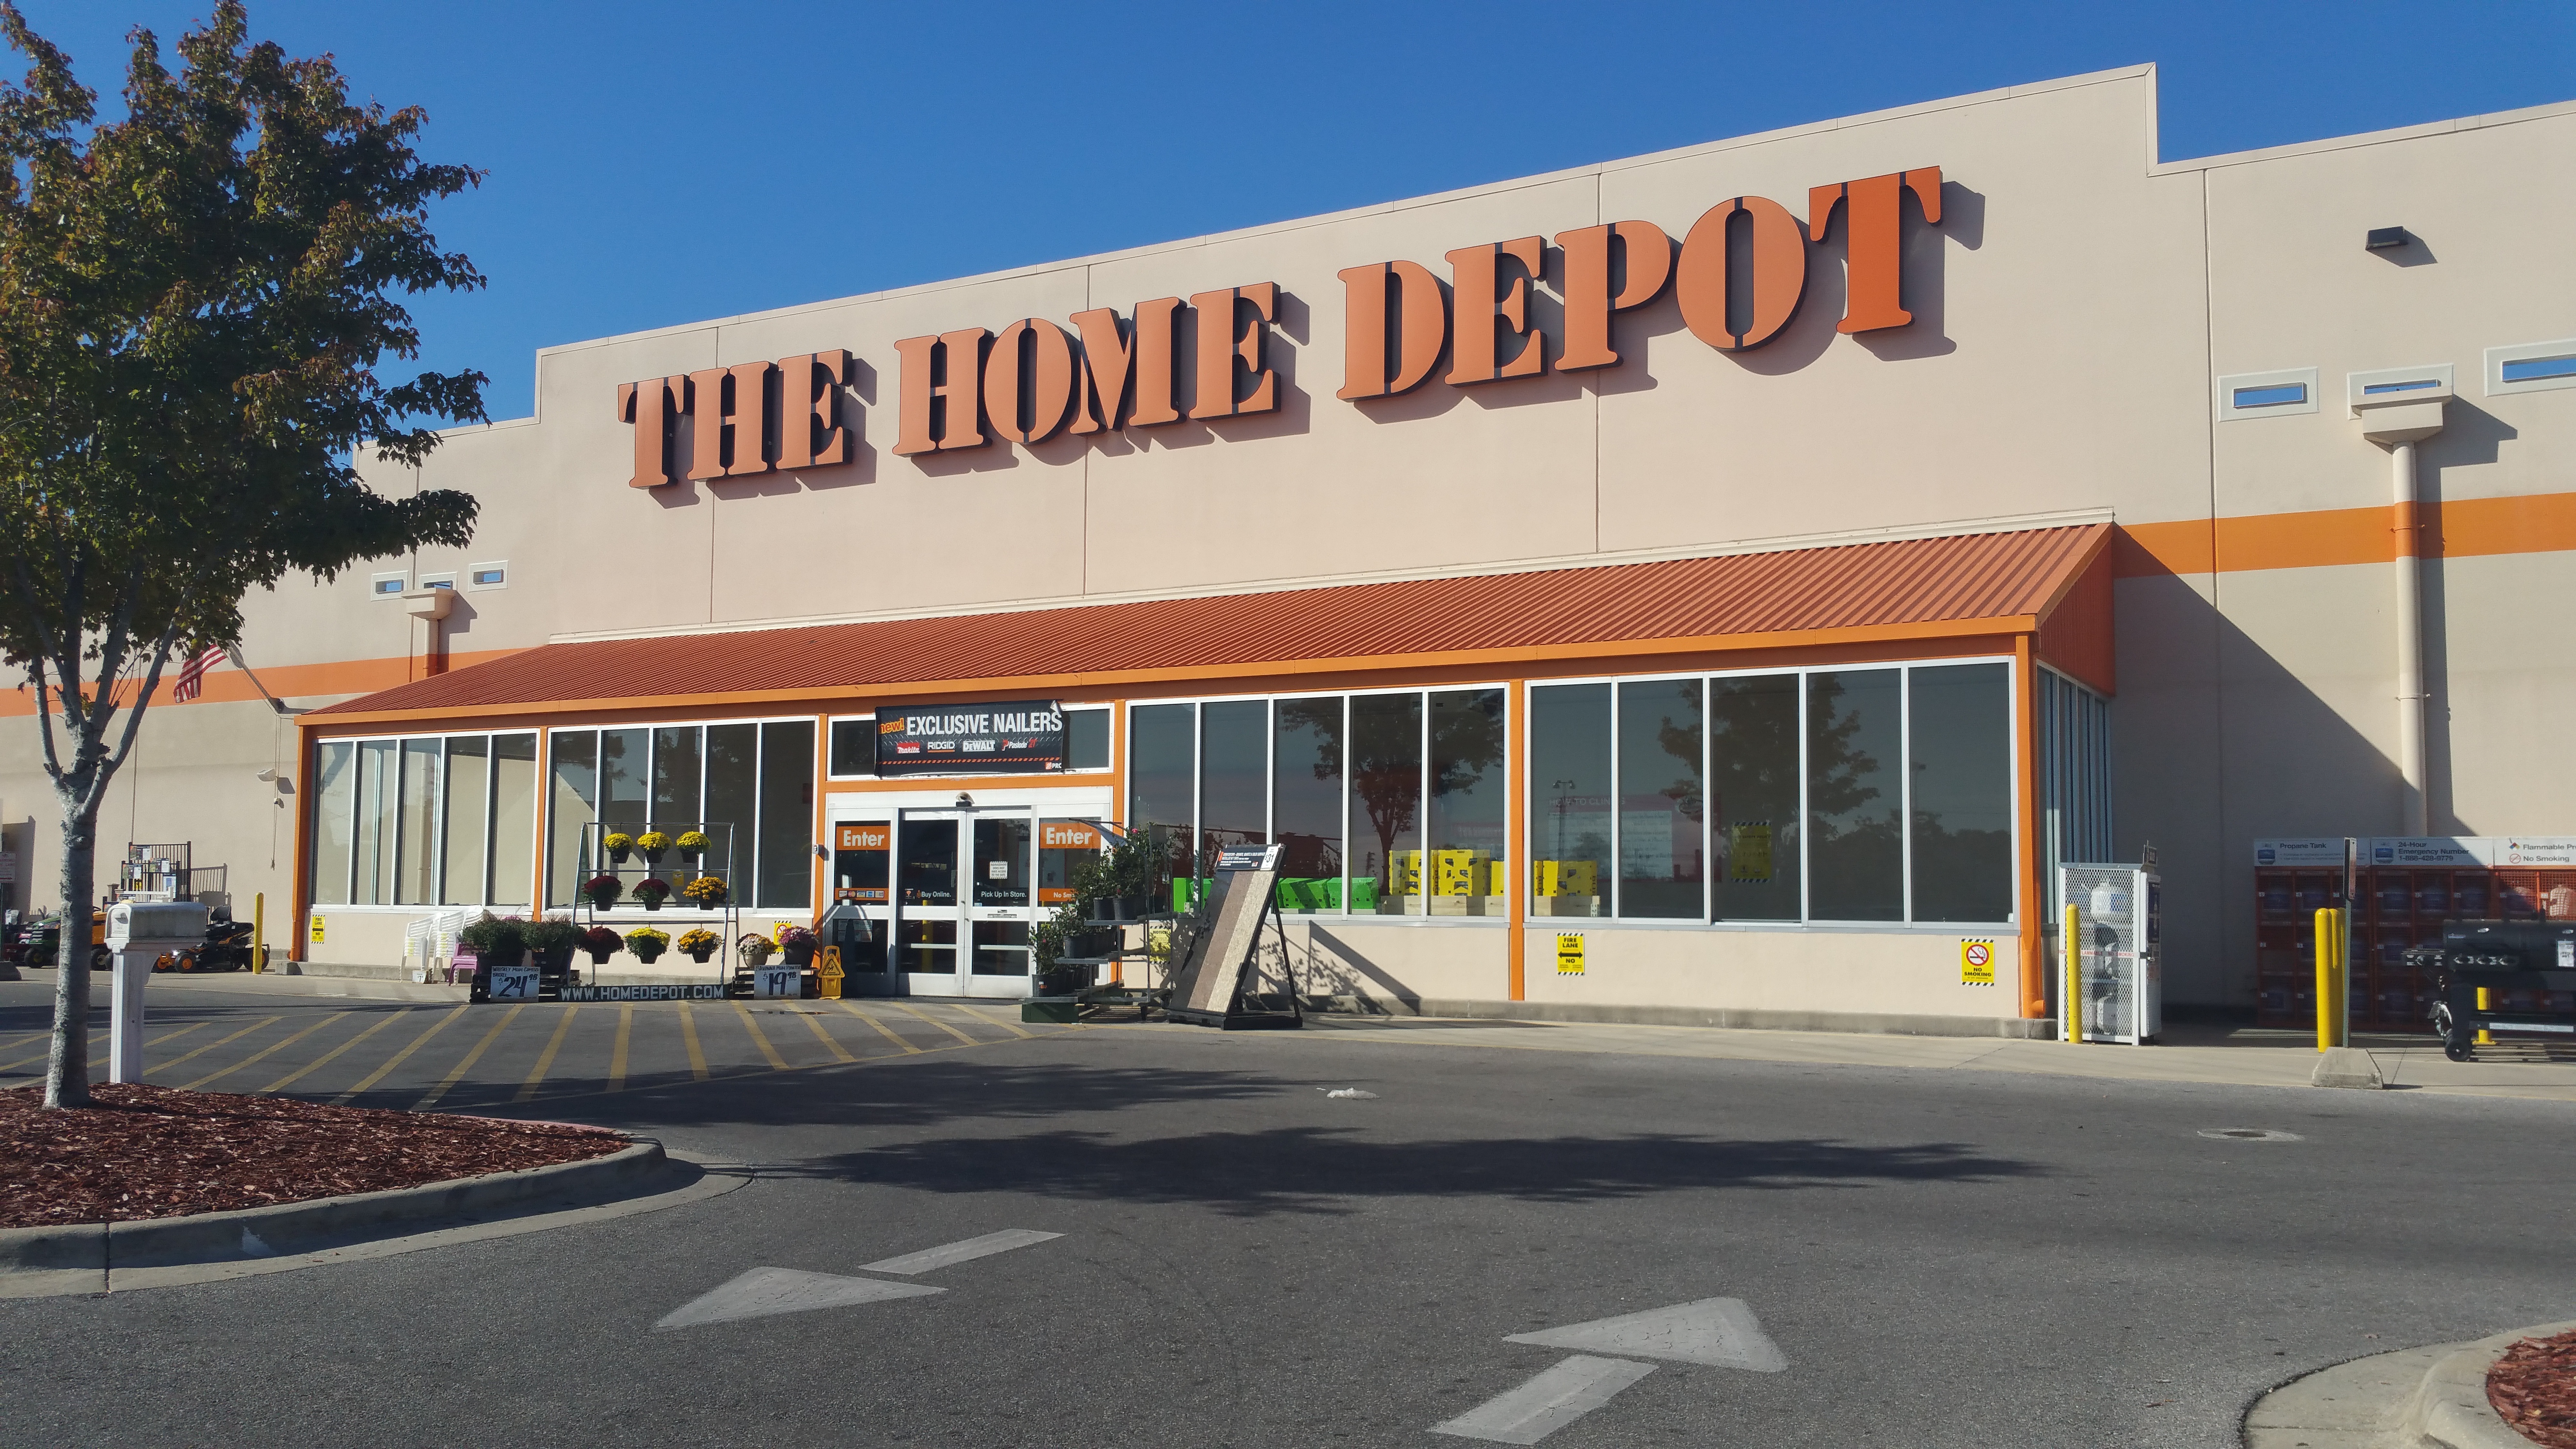 The Home Depot Coupons near me in Pensacola, FL 32506 